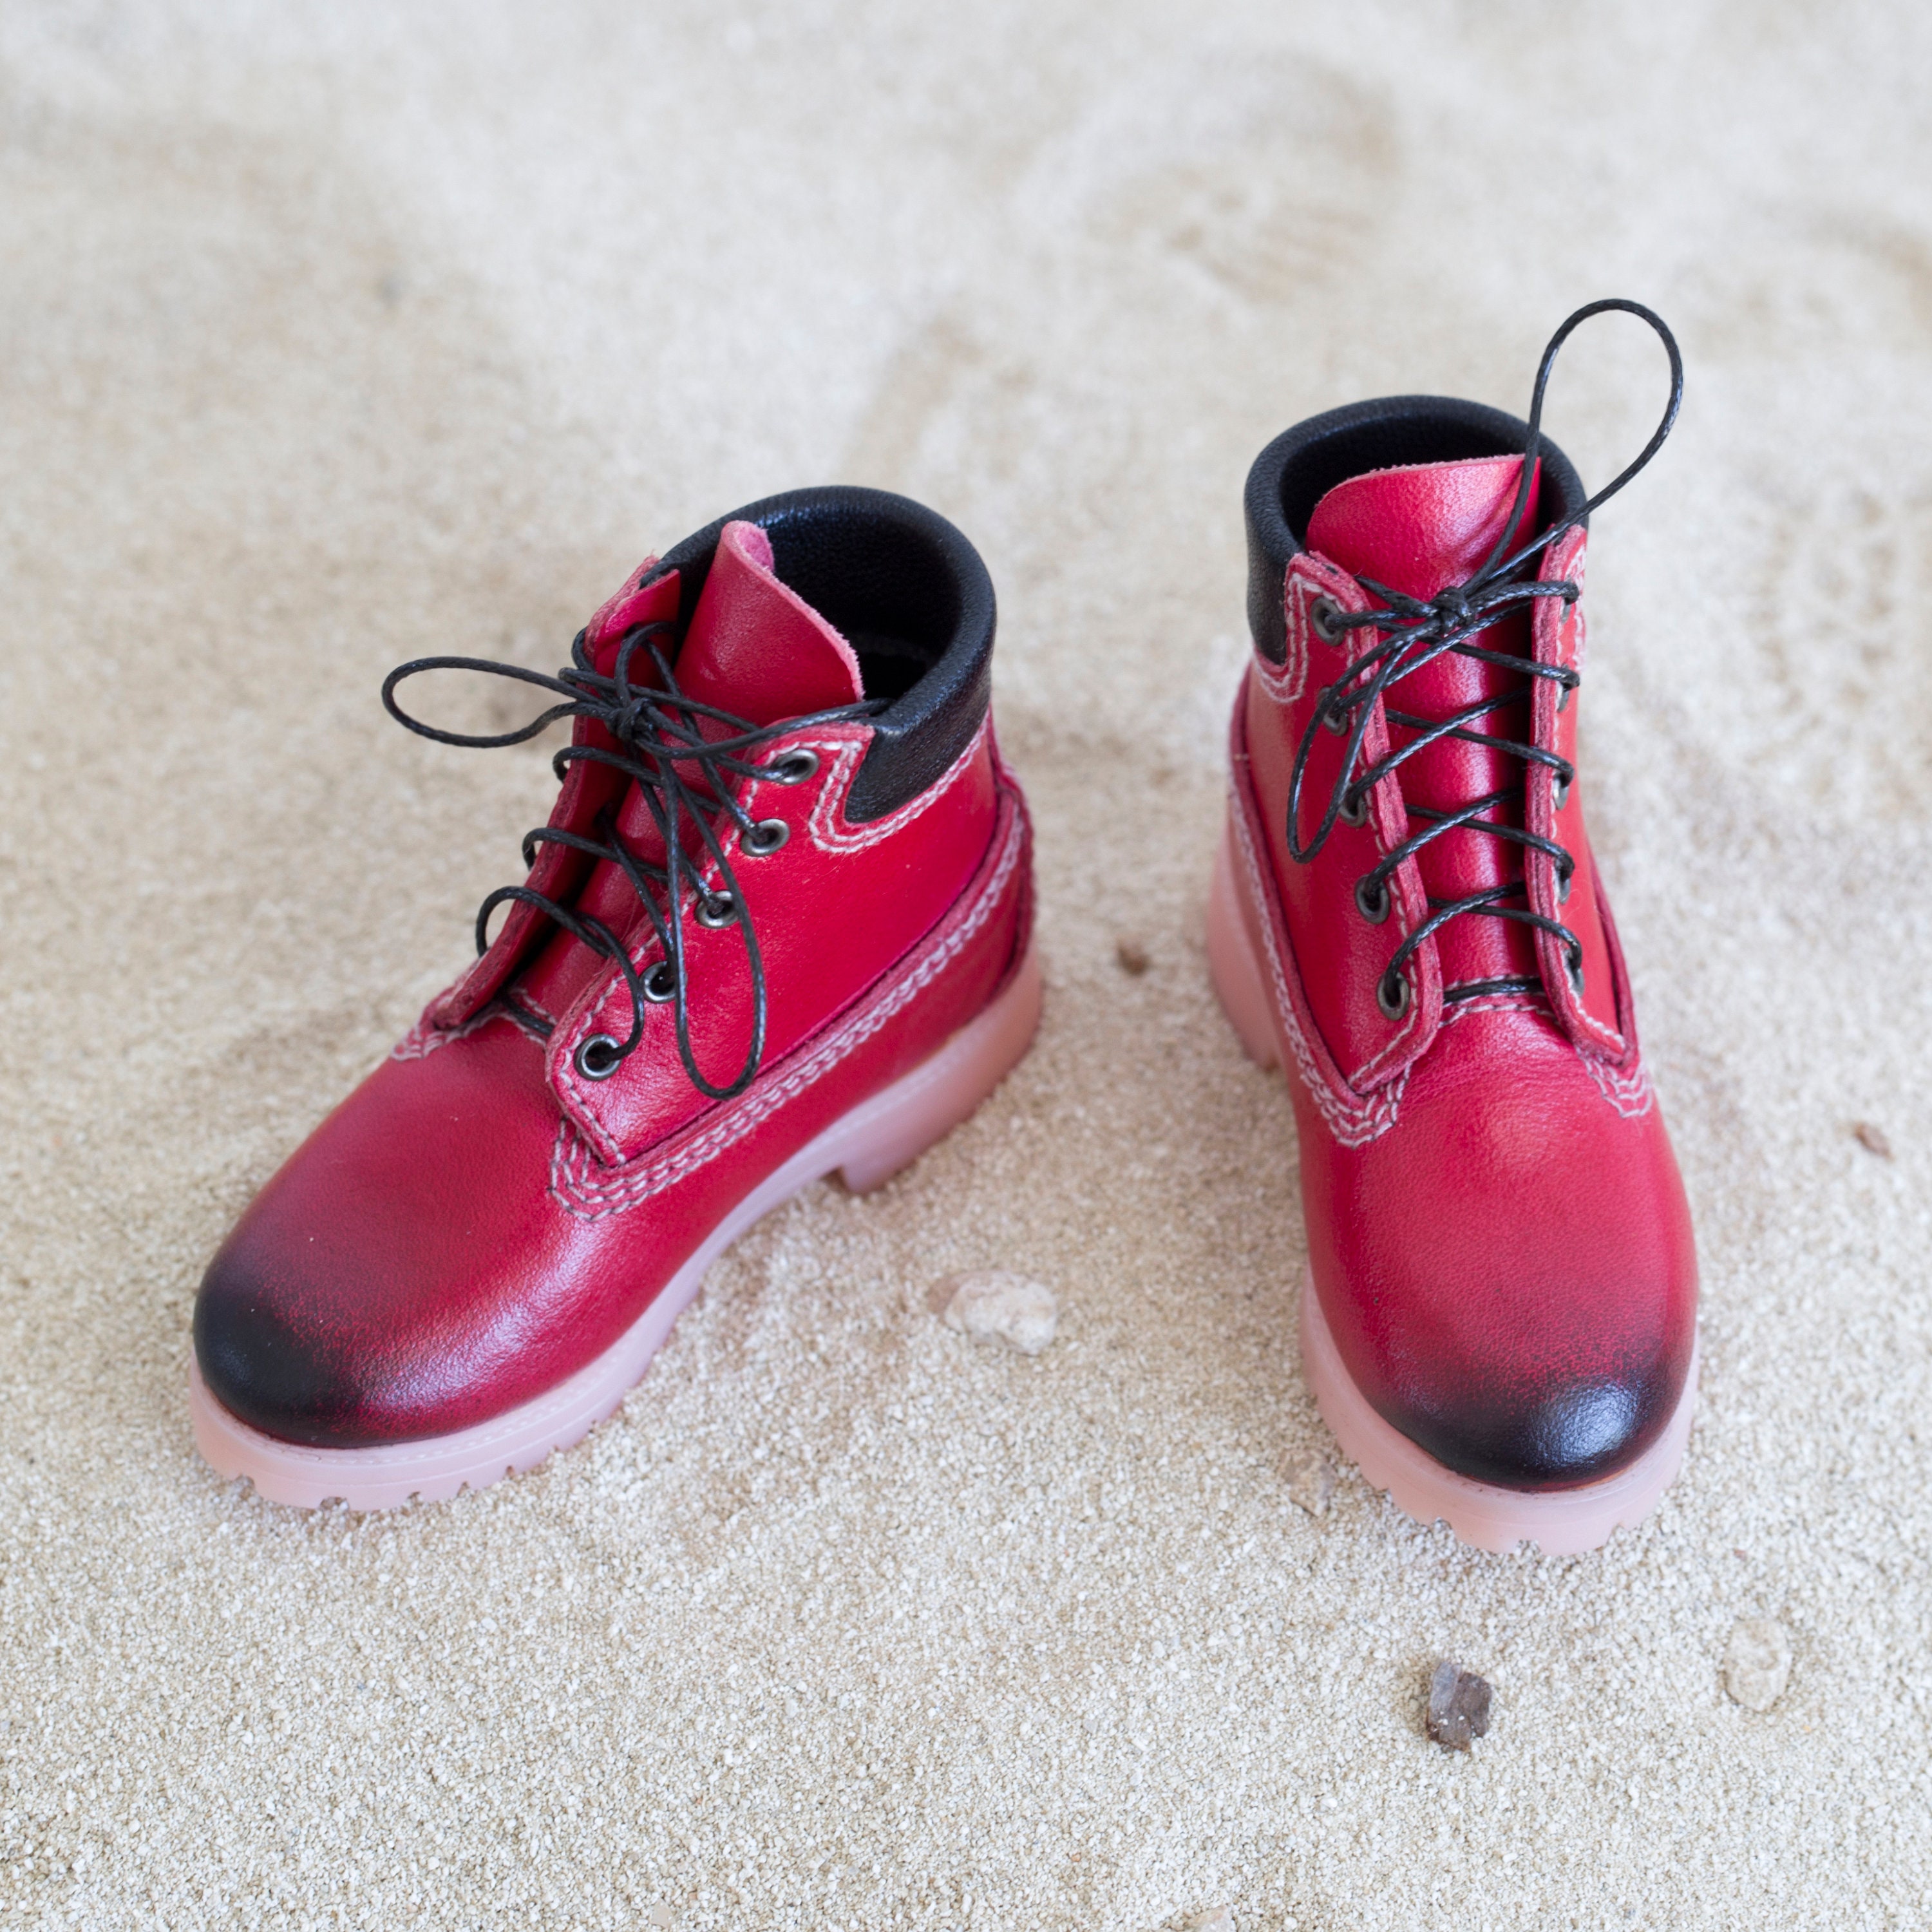 Red timberland boots - Etsy